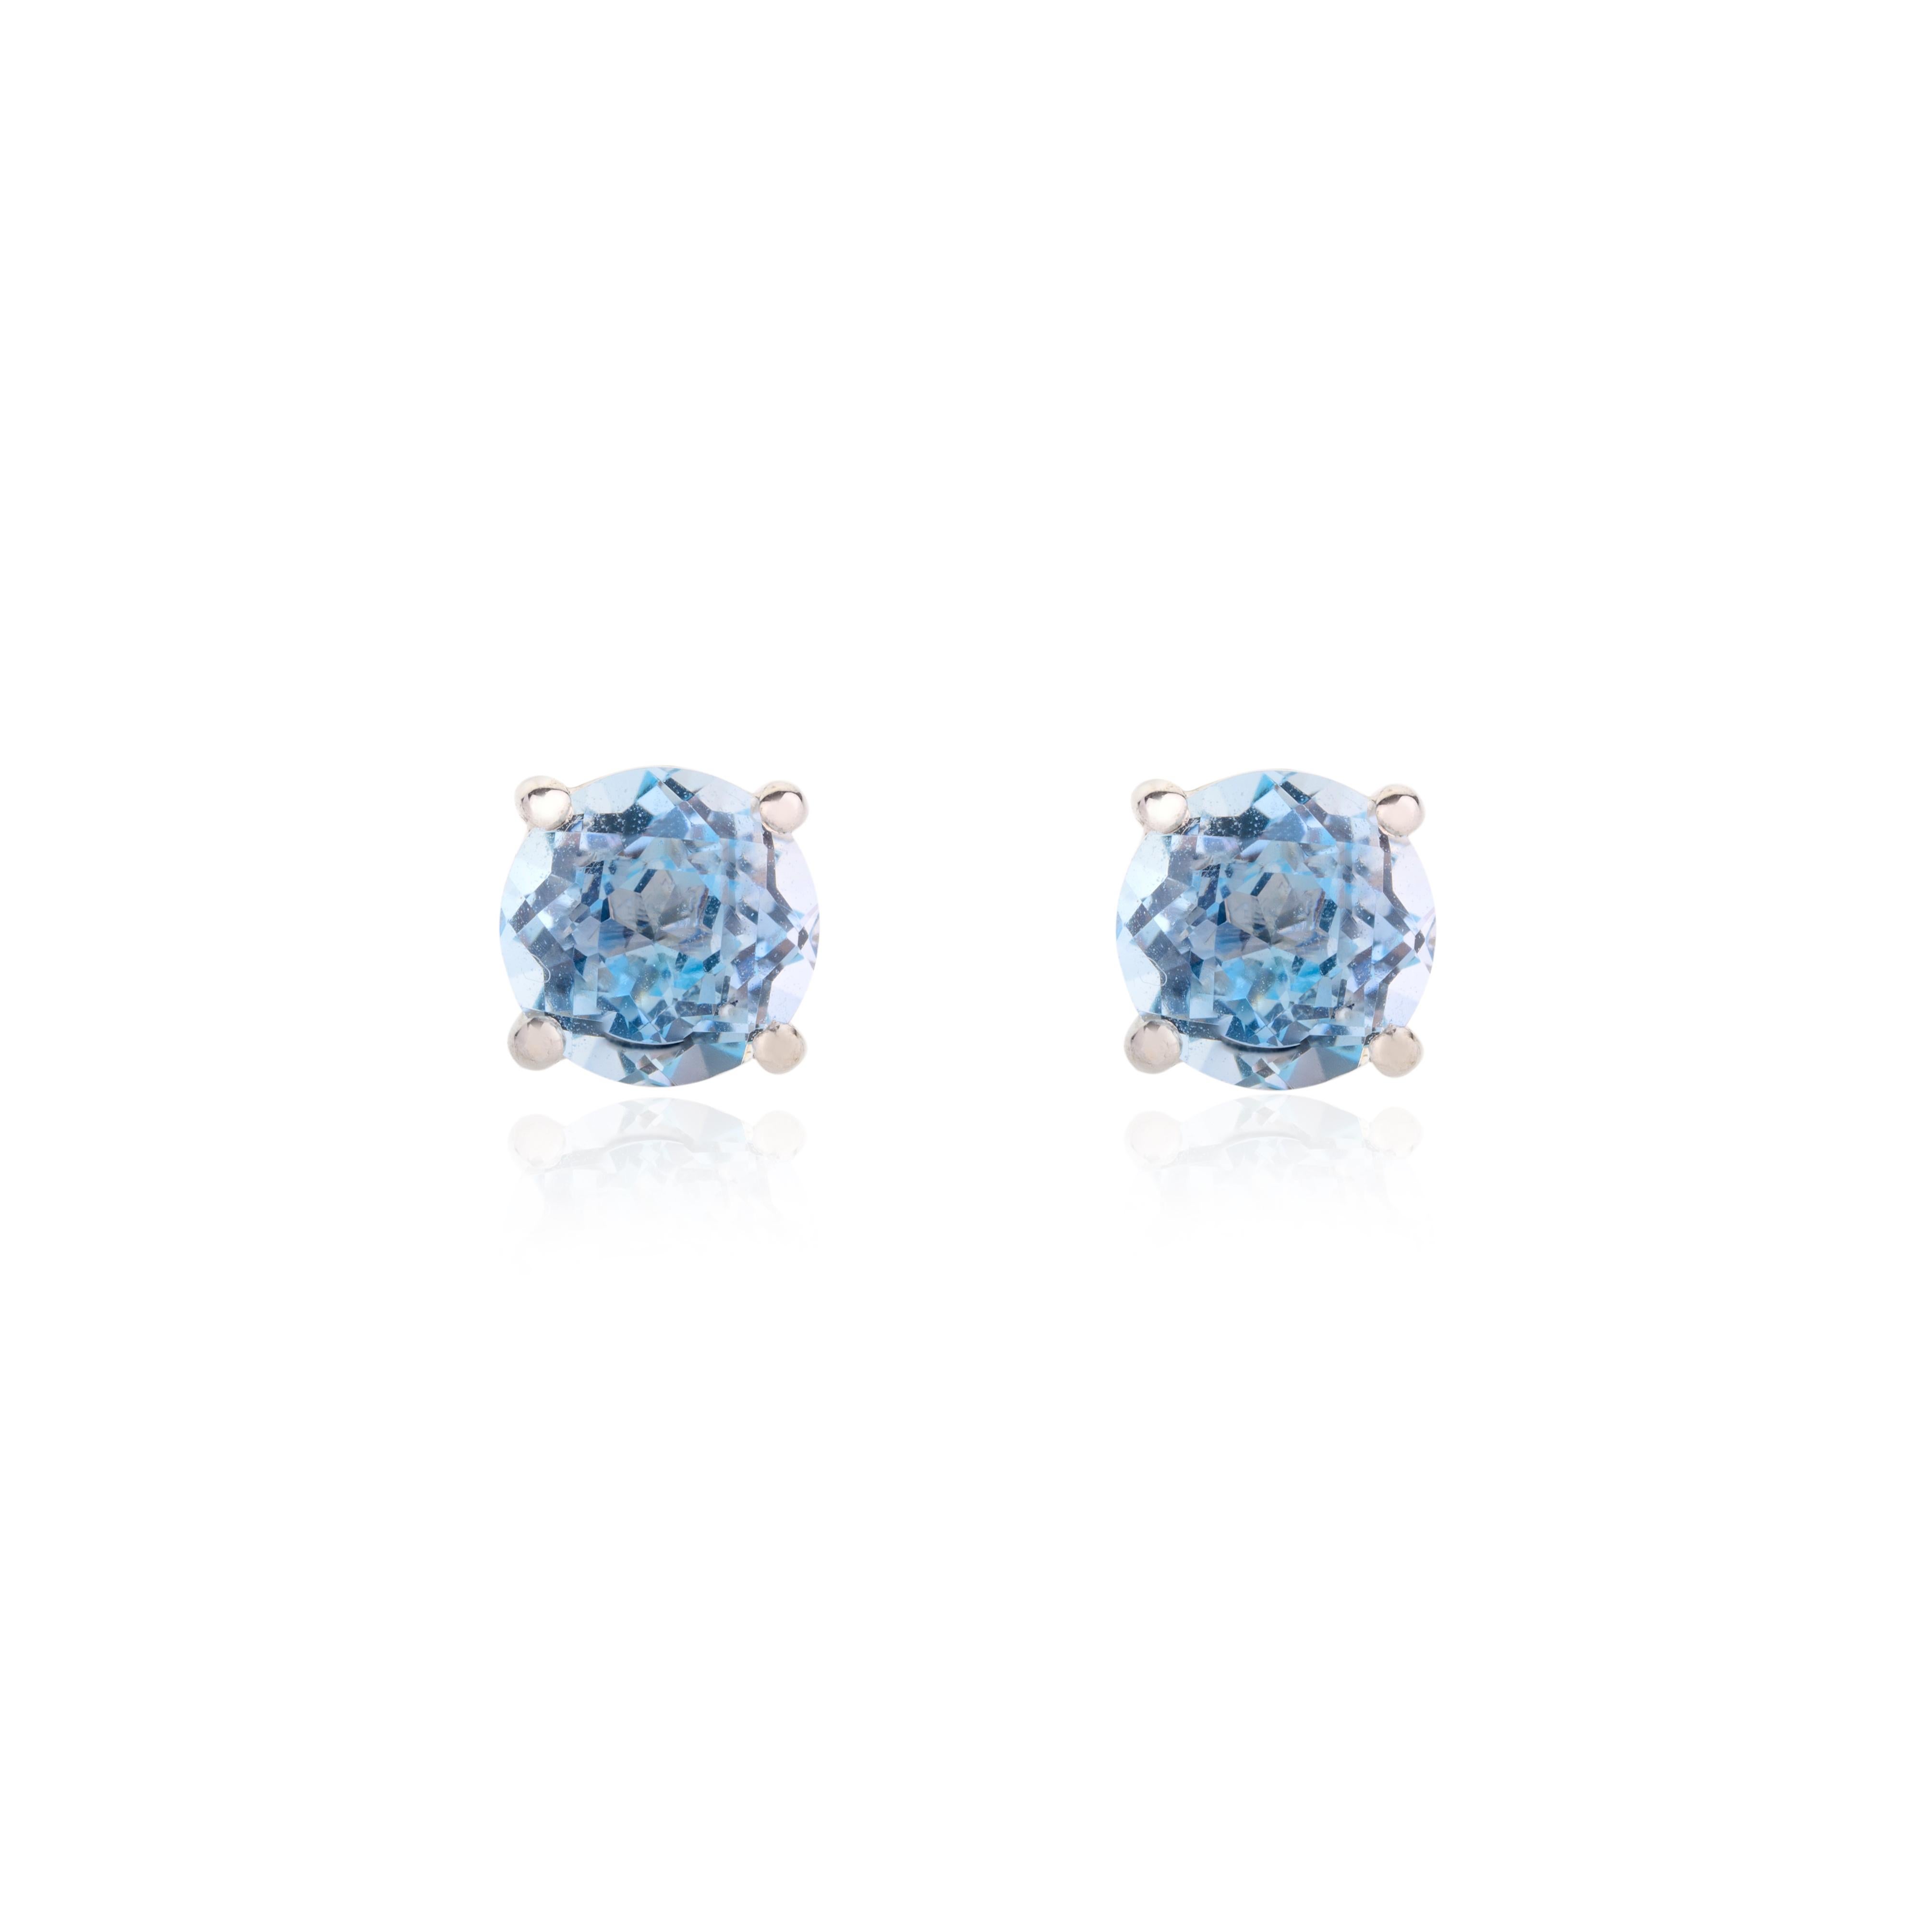 Round Cut Enchanting 14k Solid White Gold Dainty Round Blue Topaz Stud Earrings